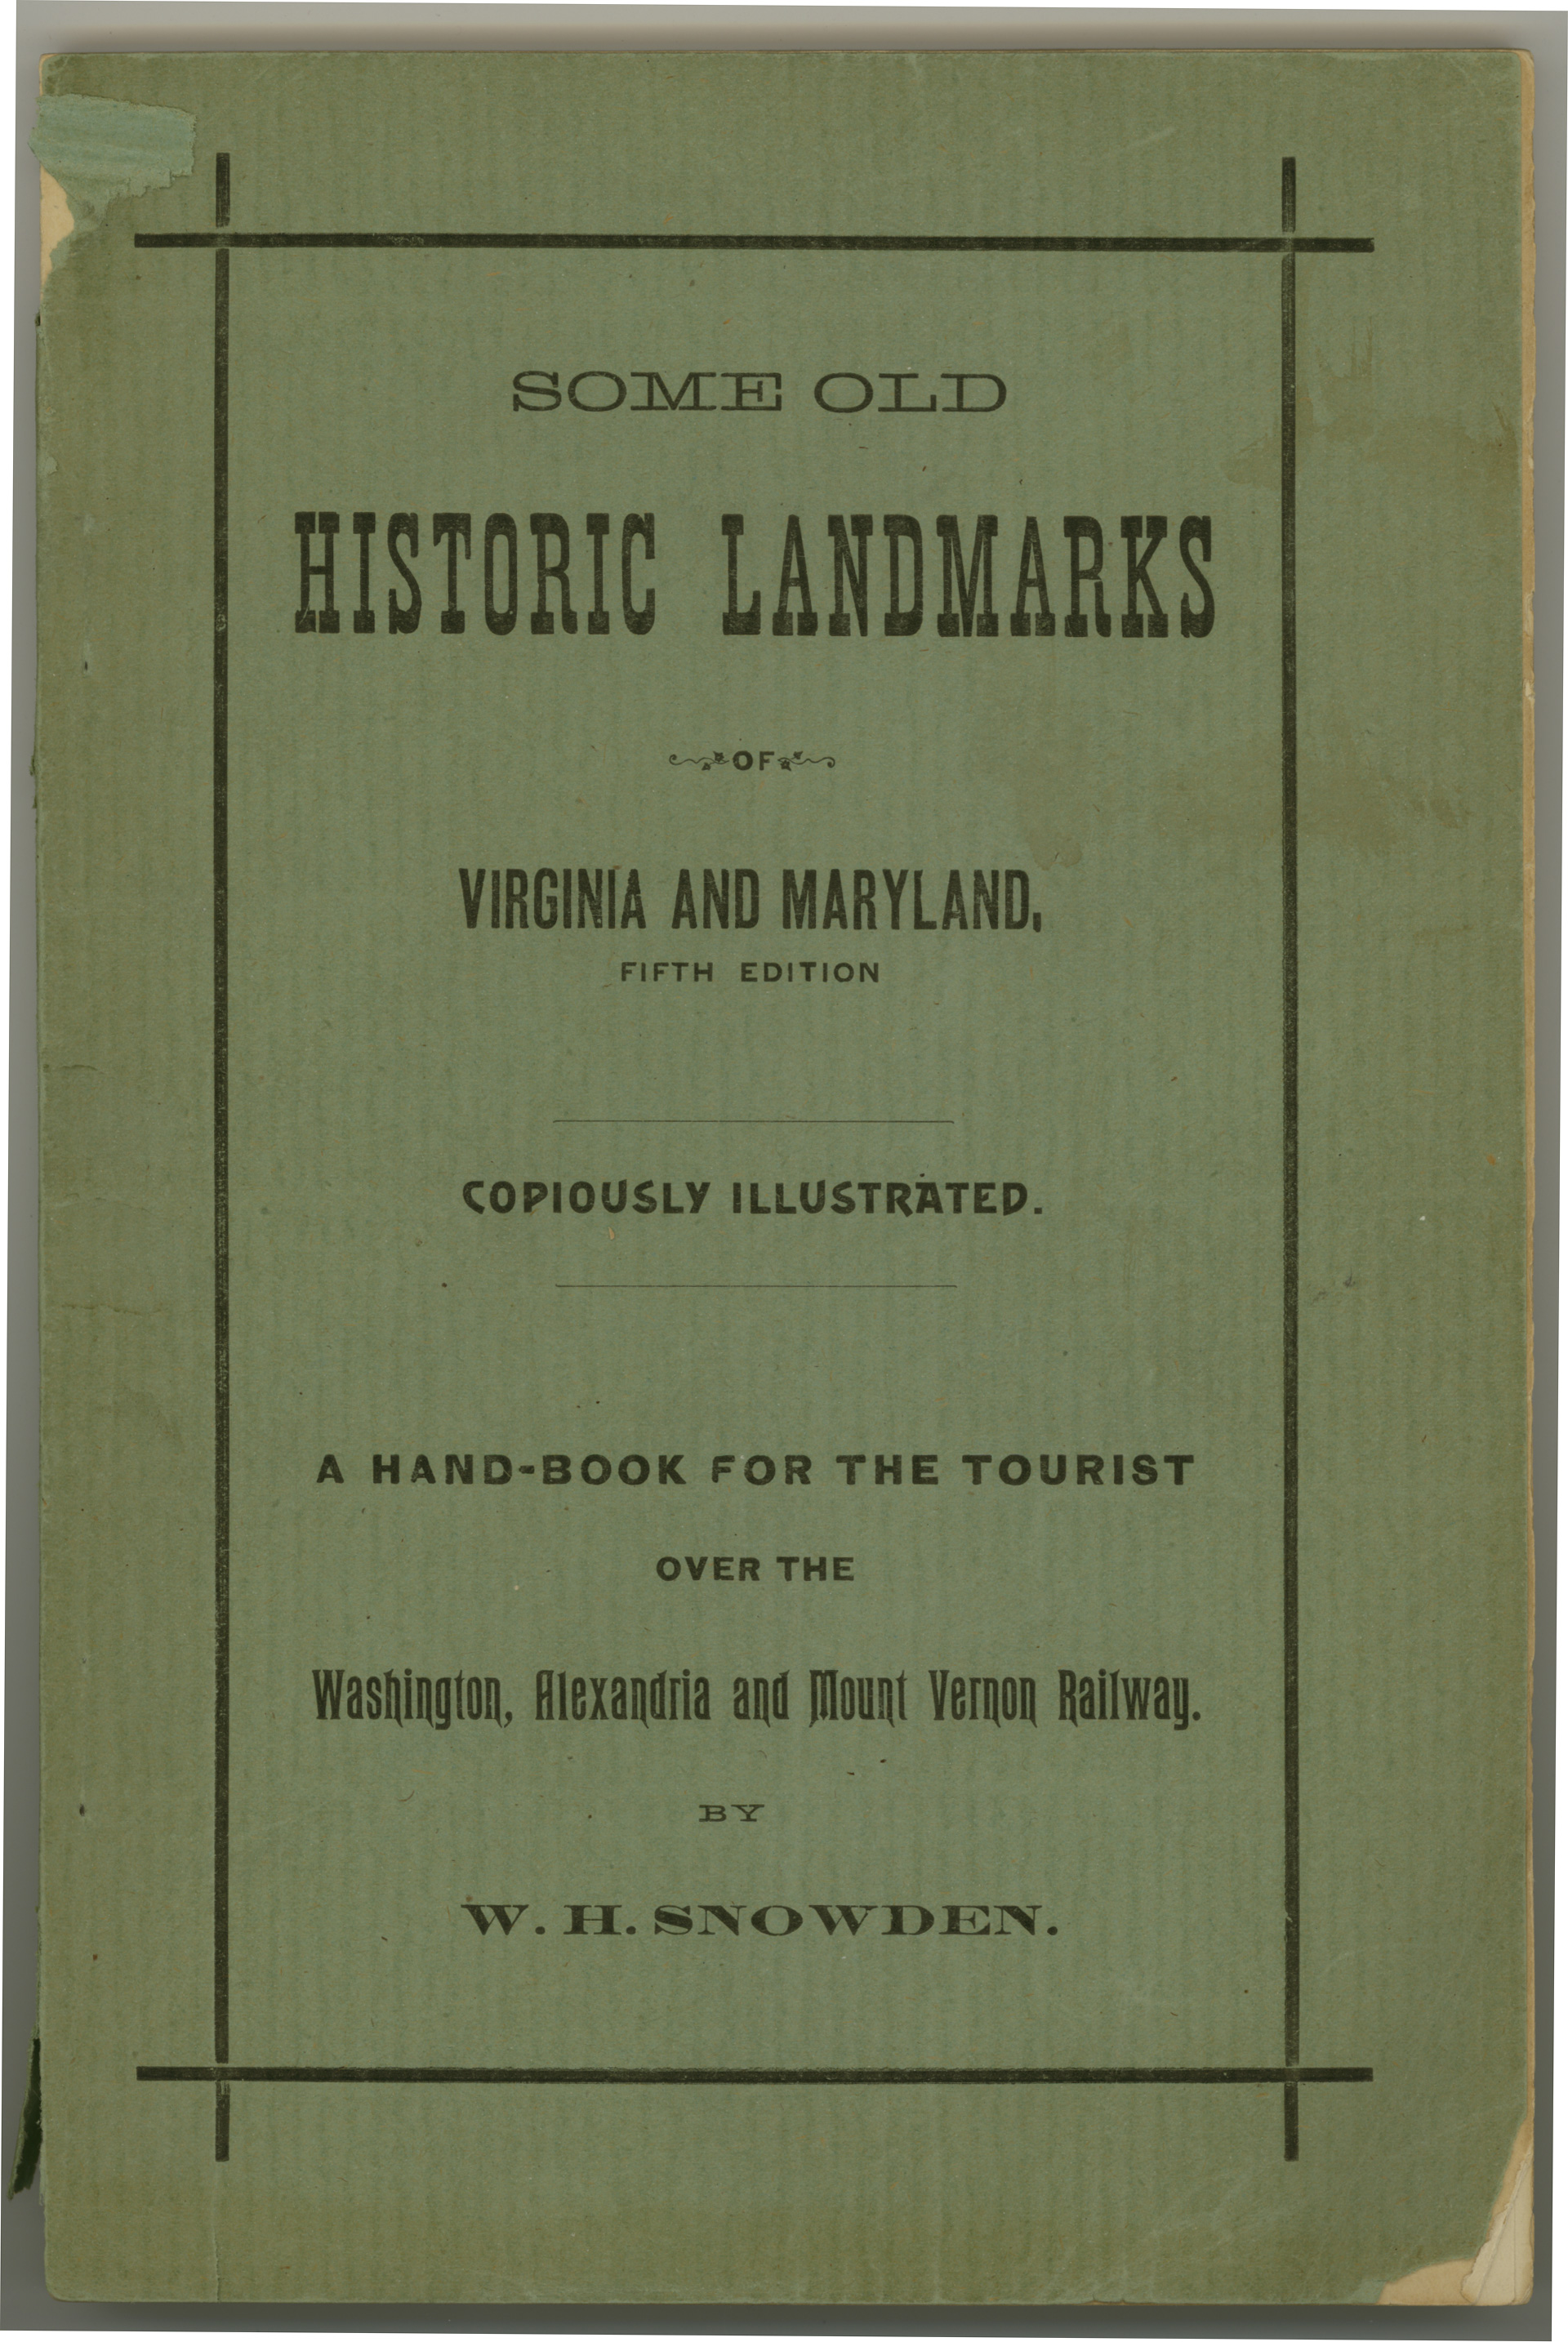 BookCoverFRONT